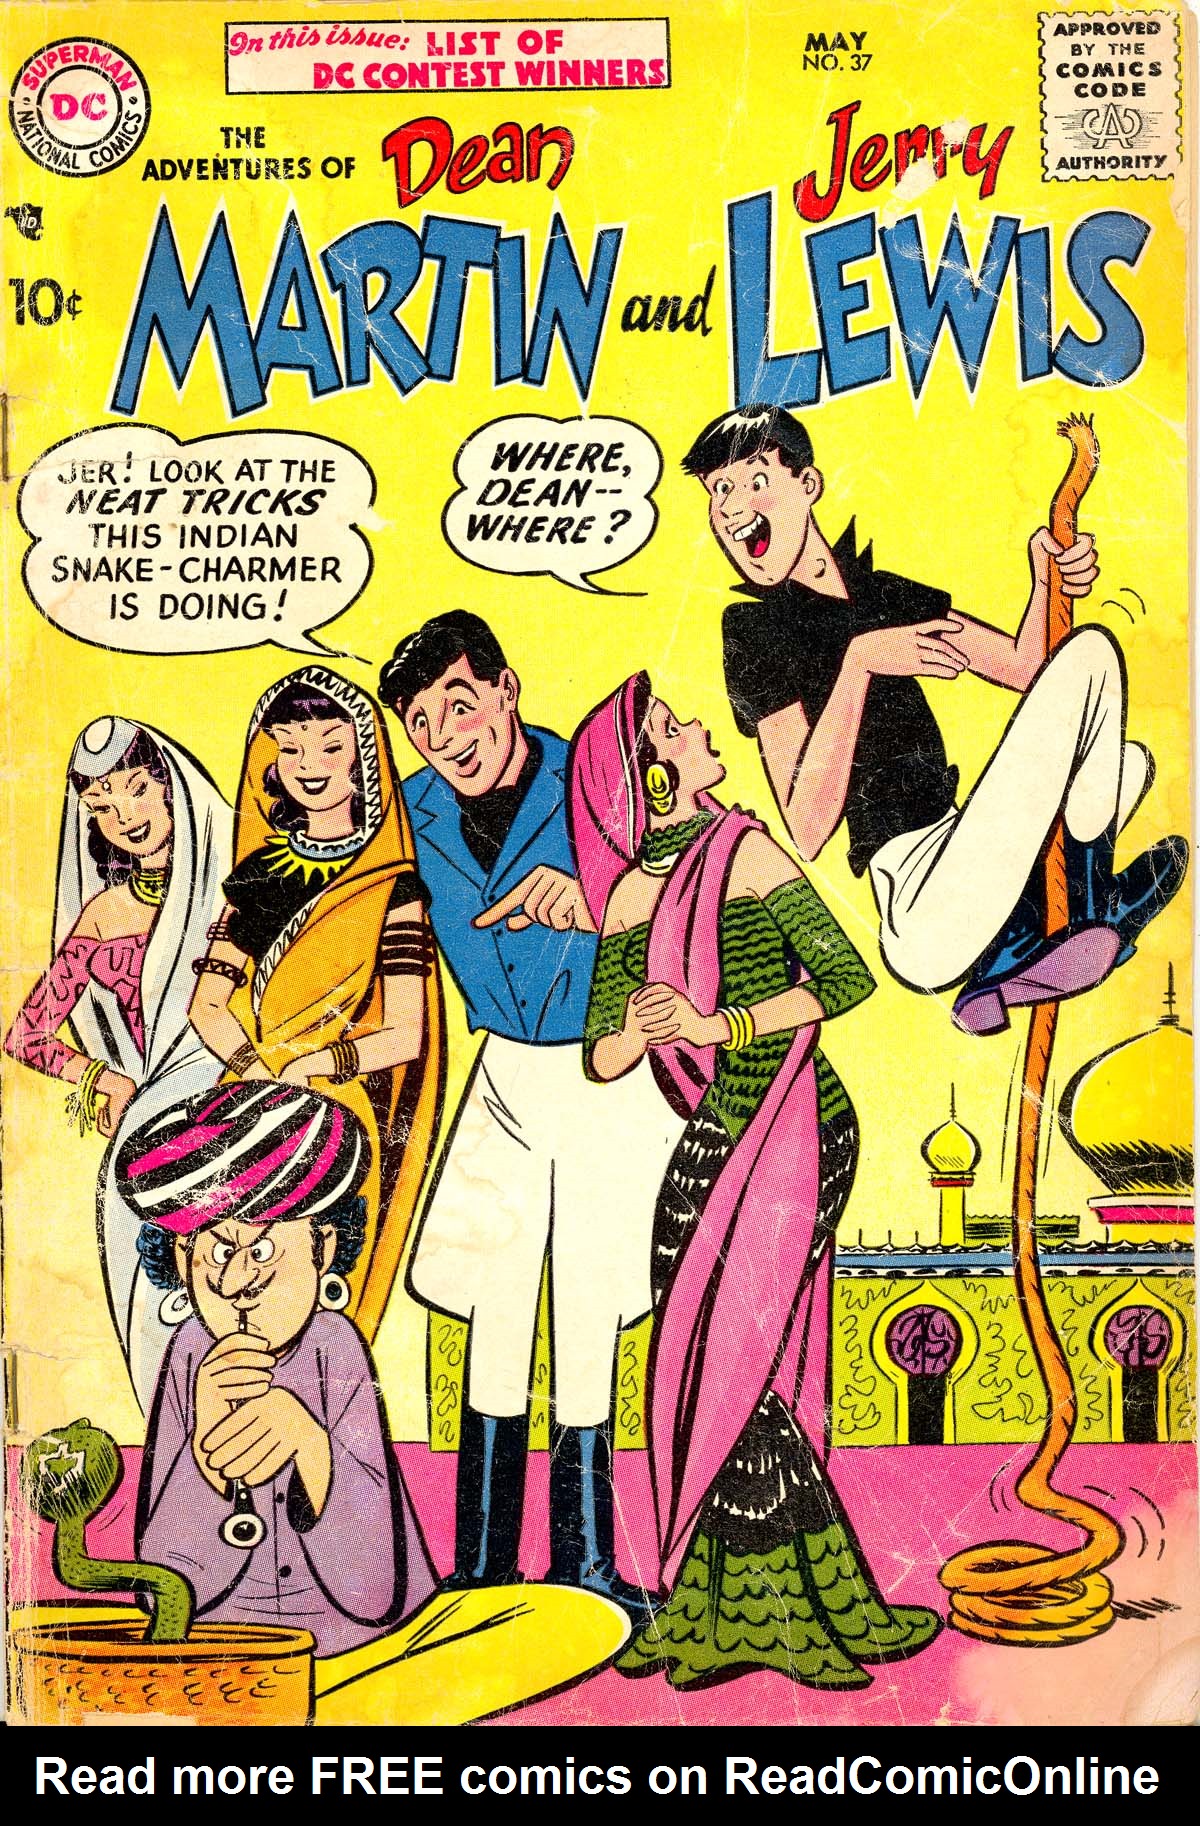 The Adventures of Dean Martin and Jerry Lewis 37 Page 1